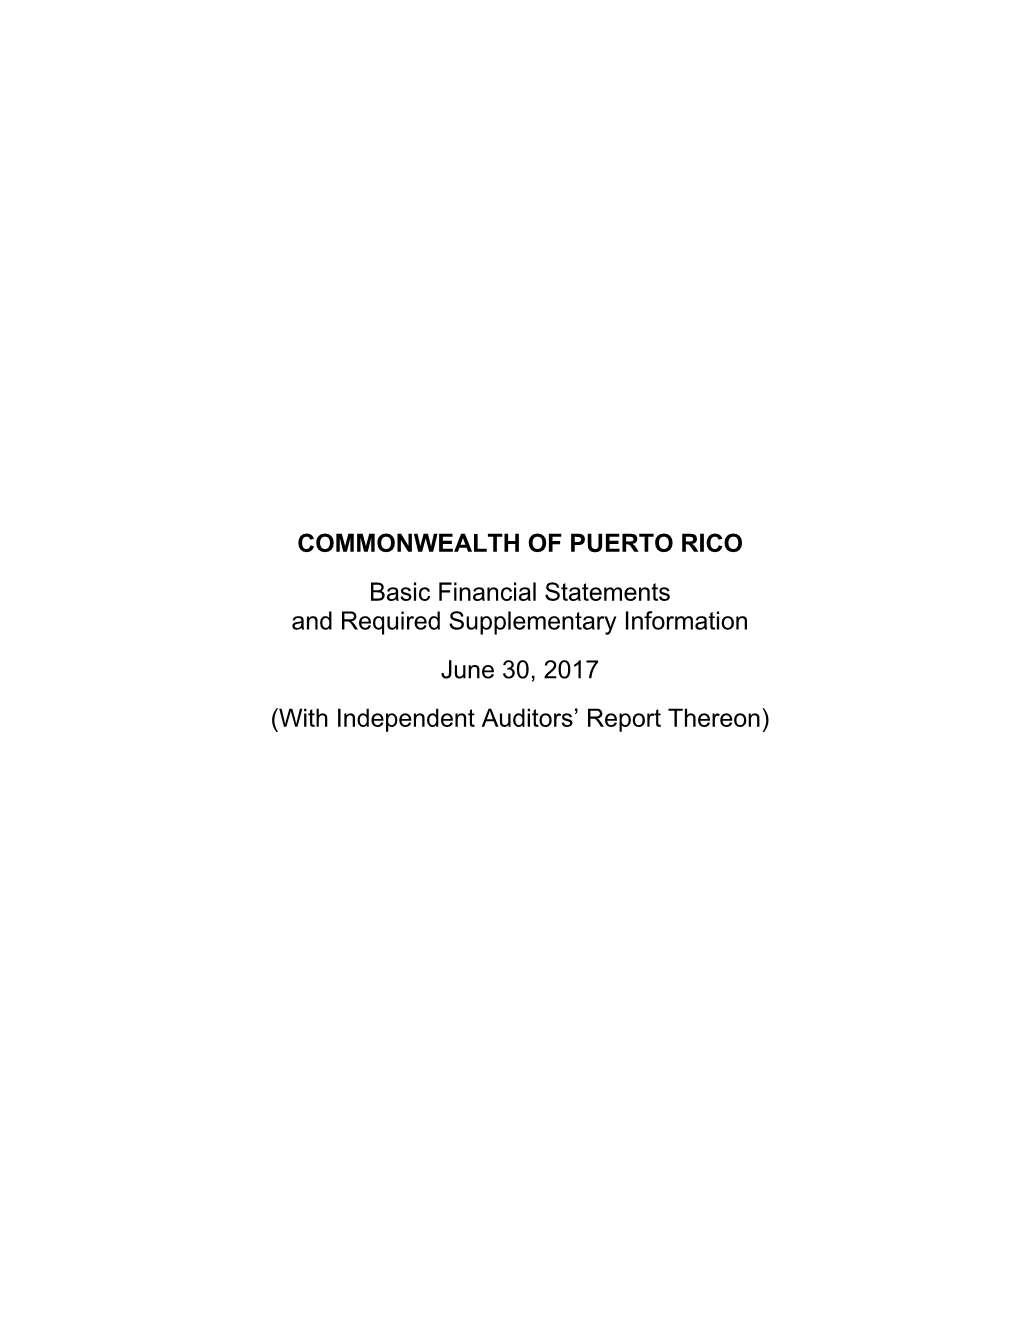 COMMONWEALTH of PUERTO RICO Basic Financial Statements and Required Supplementary Information June 30, 2017 (With Independent Auditors’ Report Thereon)